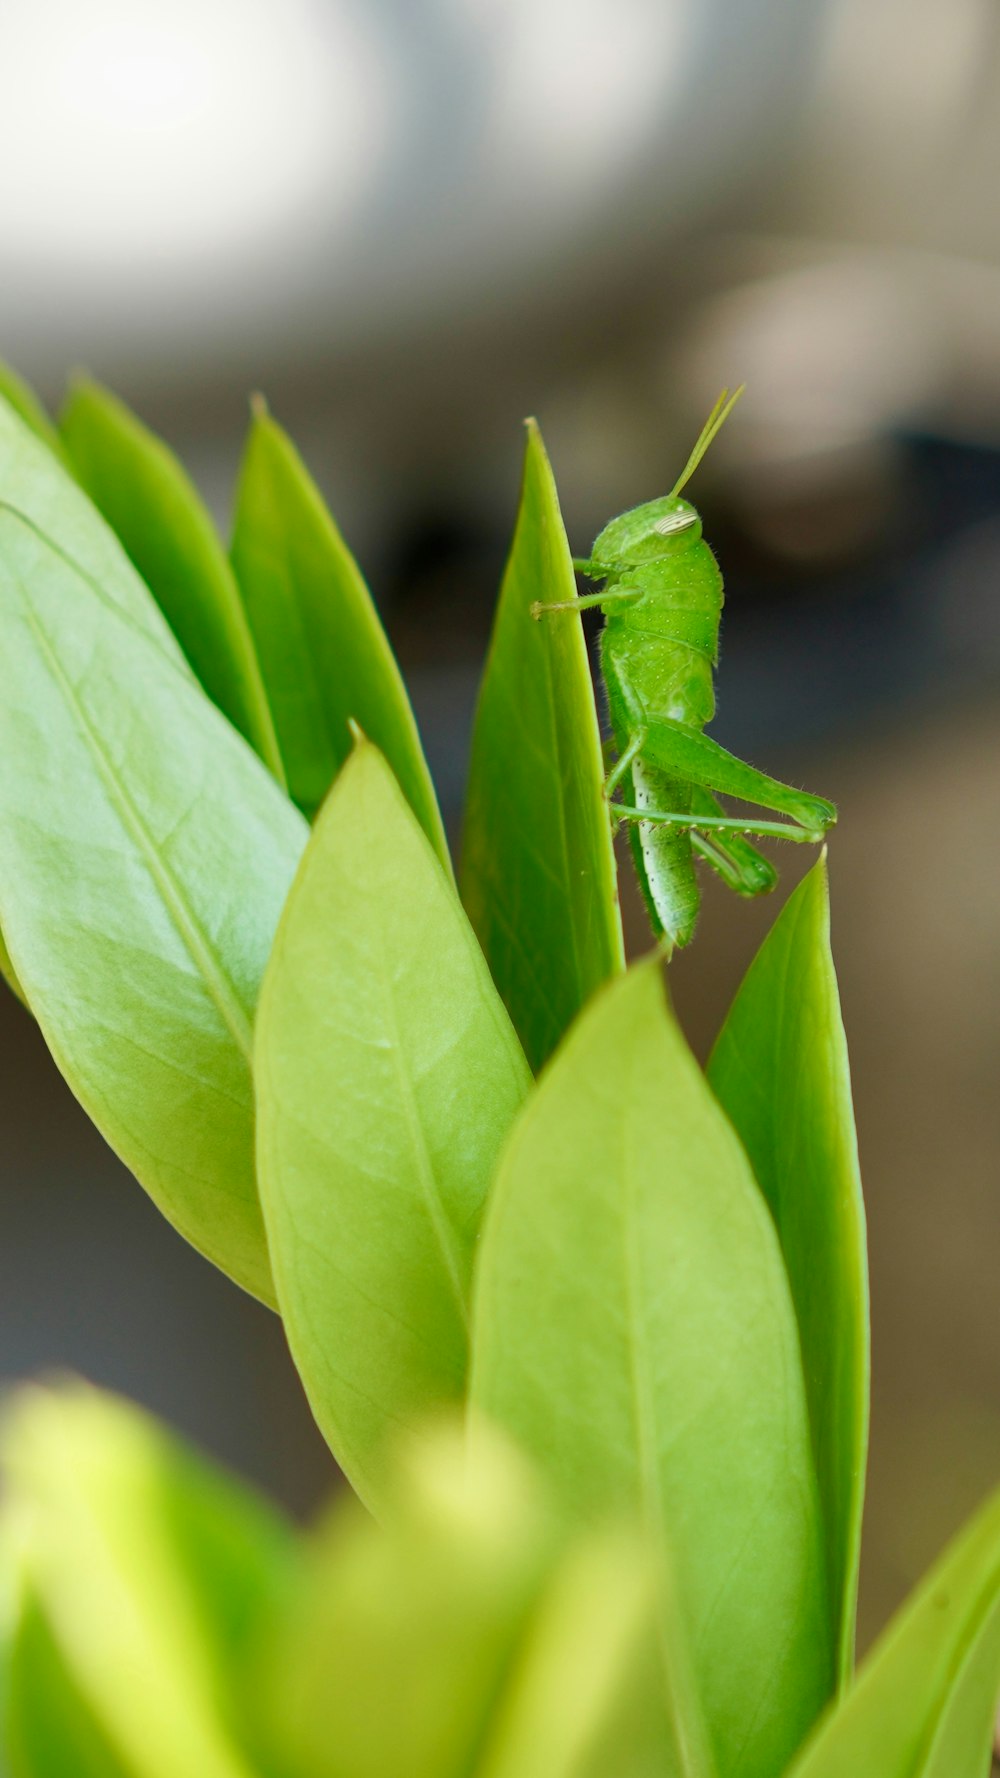 a green insect sitting on top of a green leaf